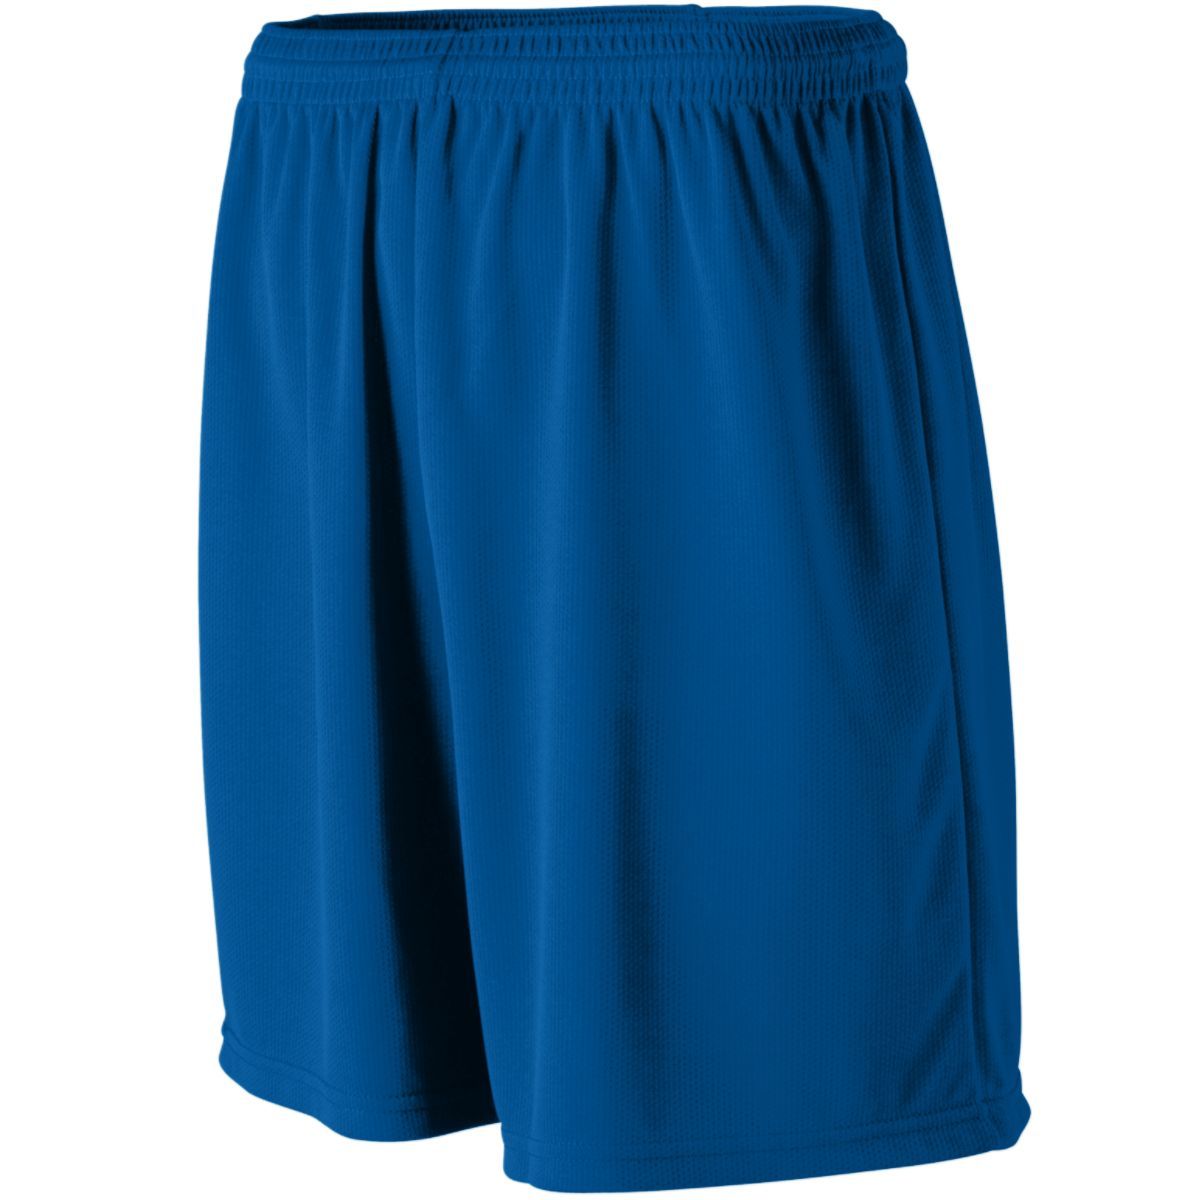 Augusta Sportswear Wicking Mesh Athletic Shorts in Royal  -Part of the Adult, Adult-Shorts, Augusta-Products product lines at KanaleyCreations.com